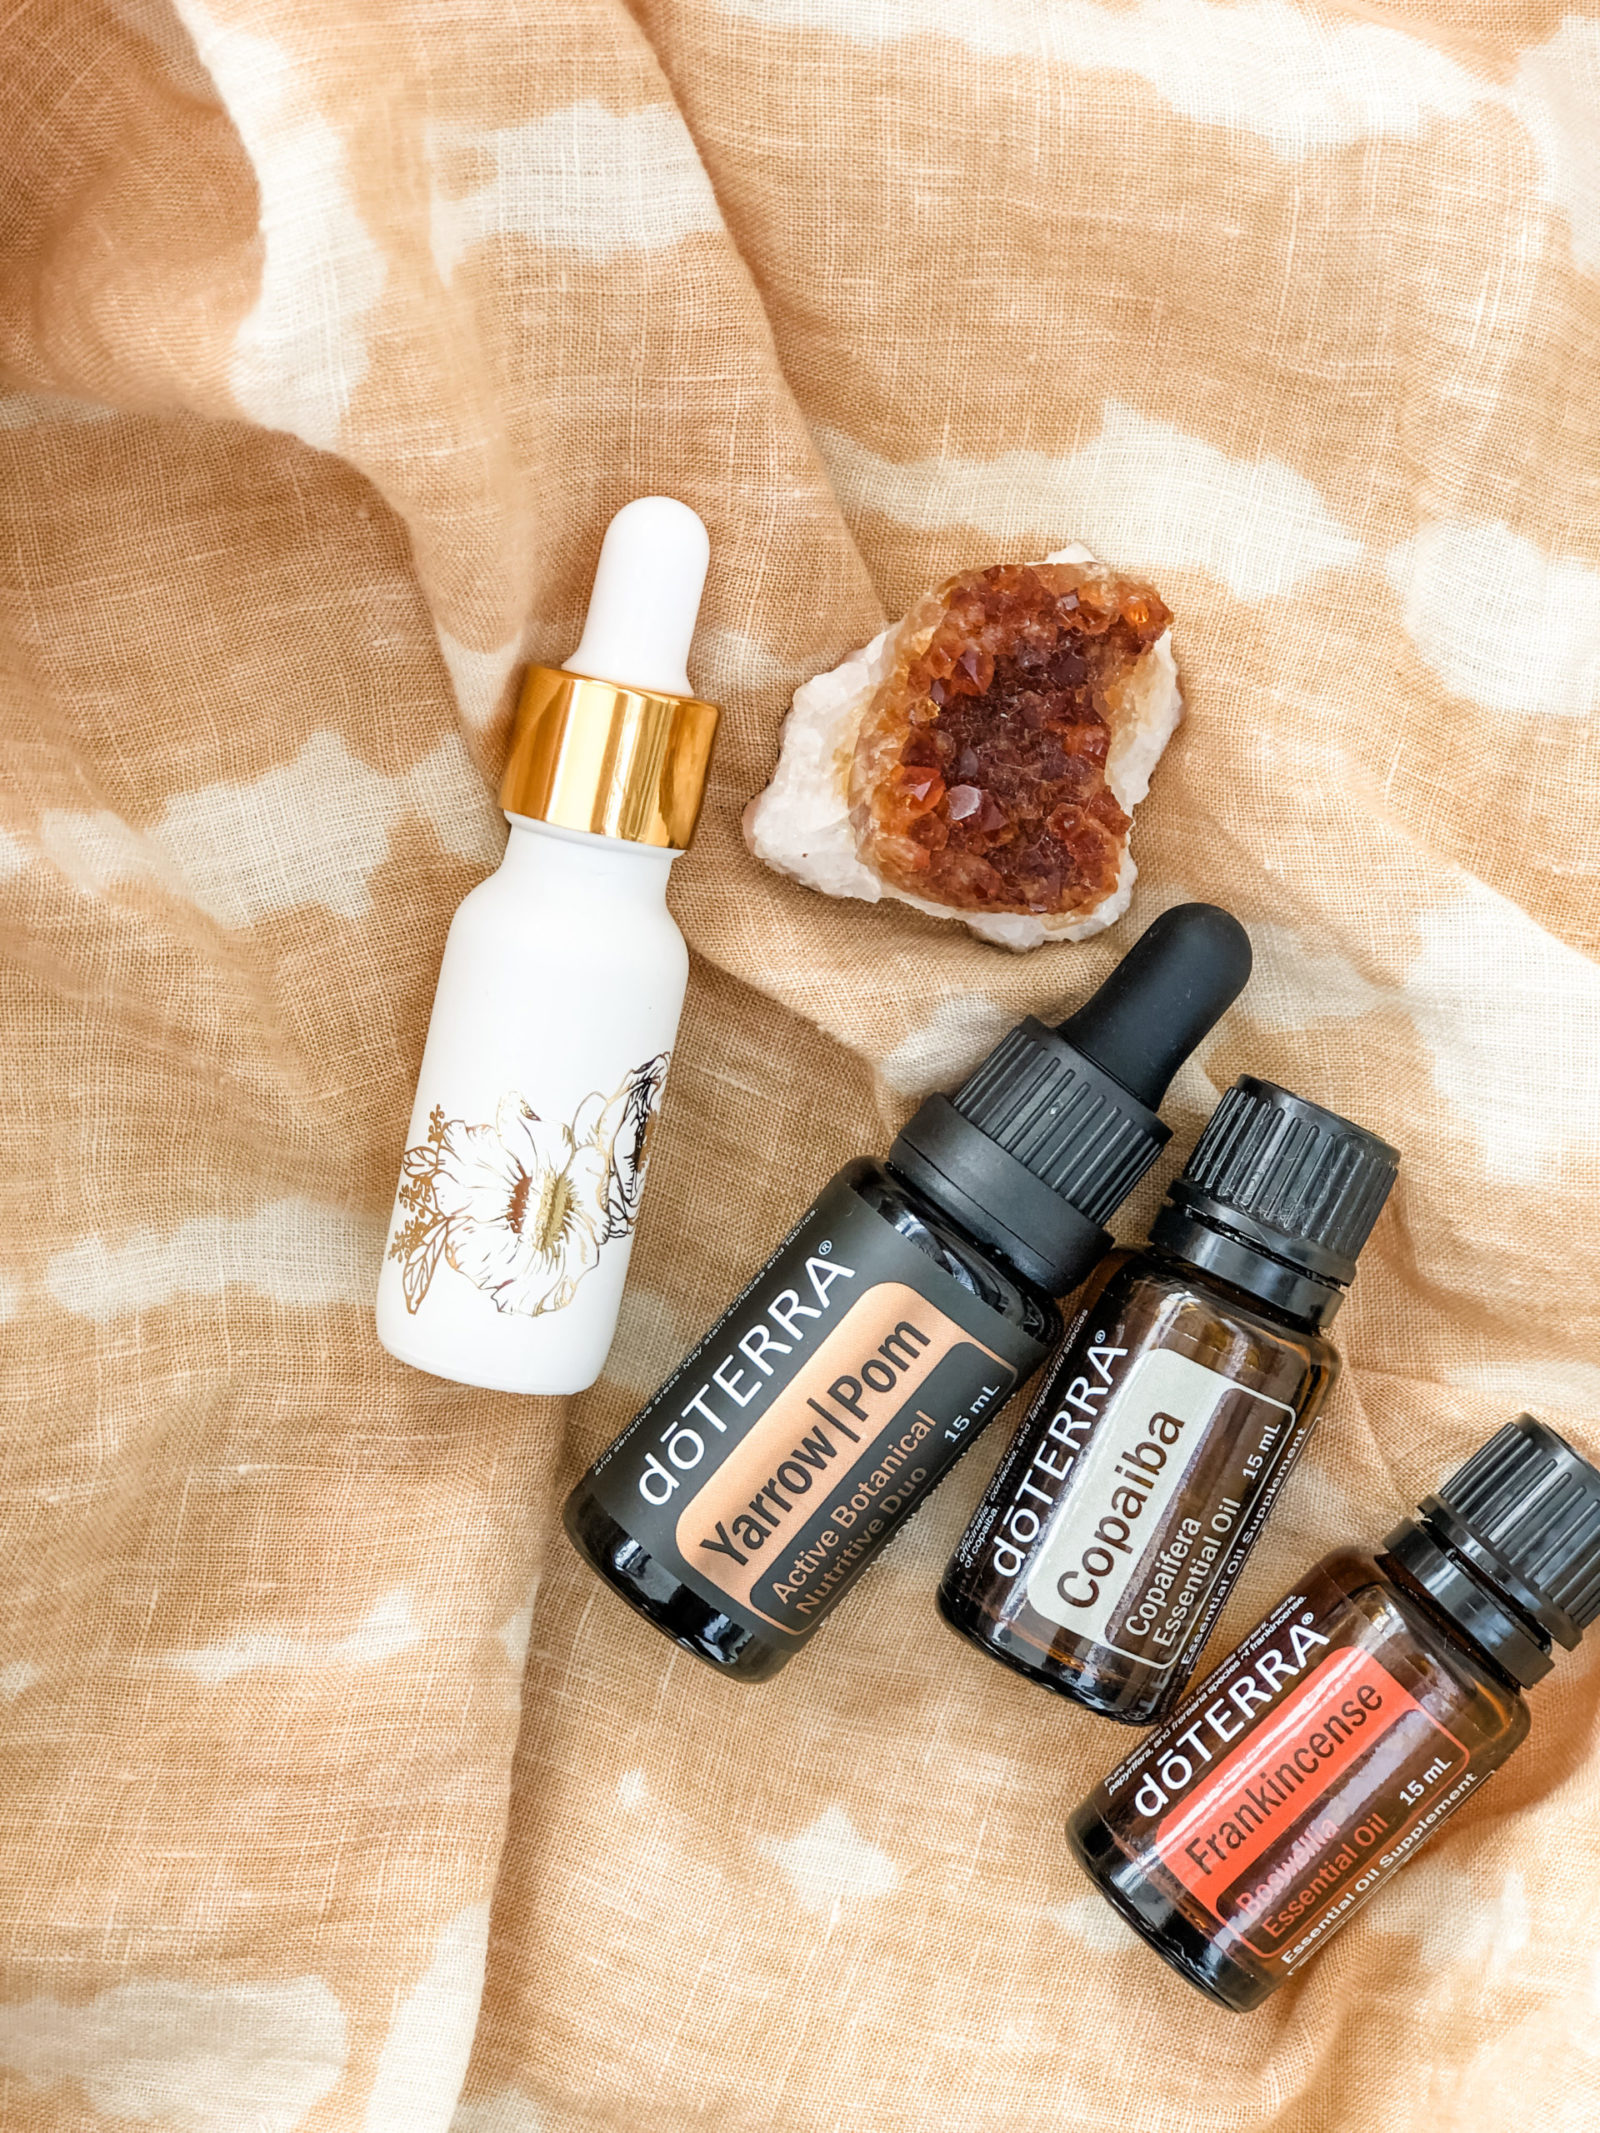 Melody Brandon shares about using doTERRA essential oils with Whimsy + Wellness products during the holiday season.